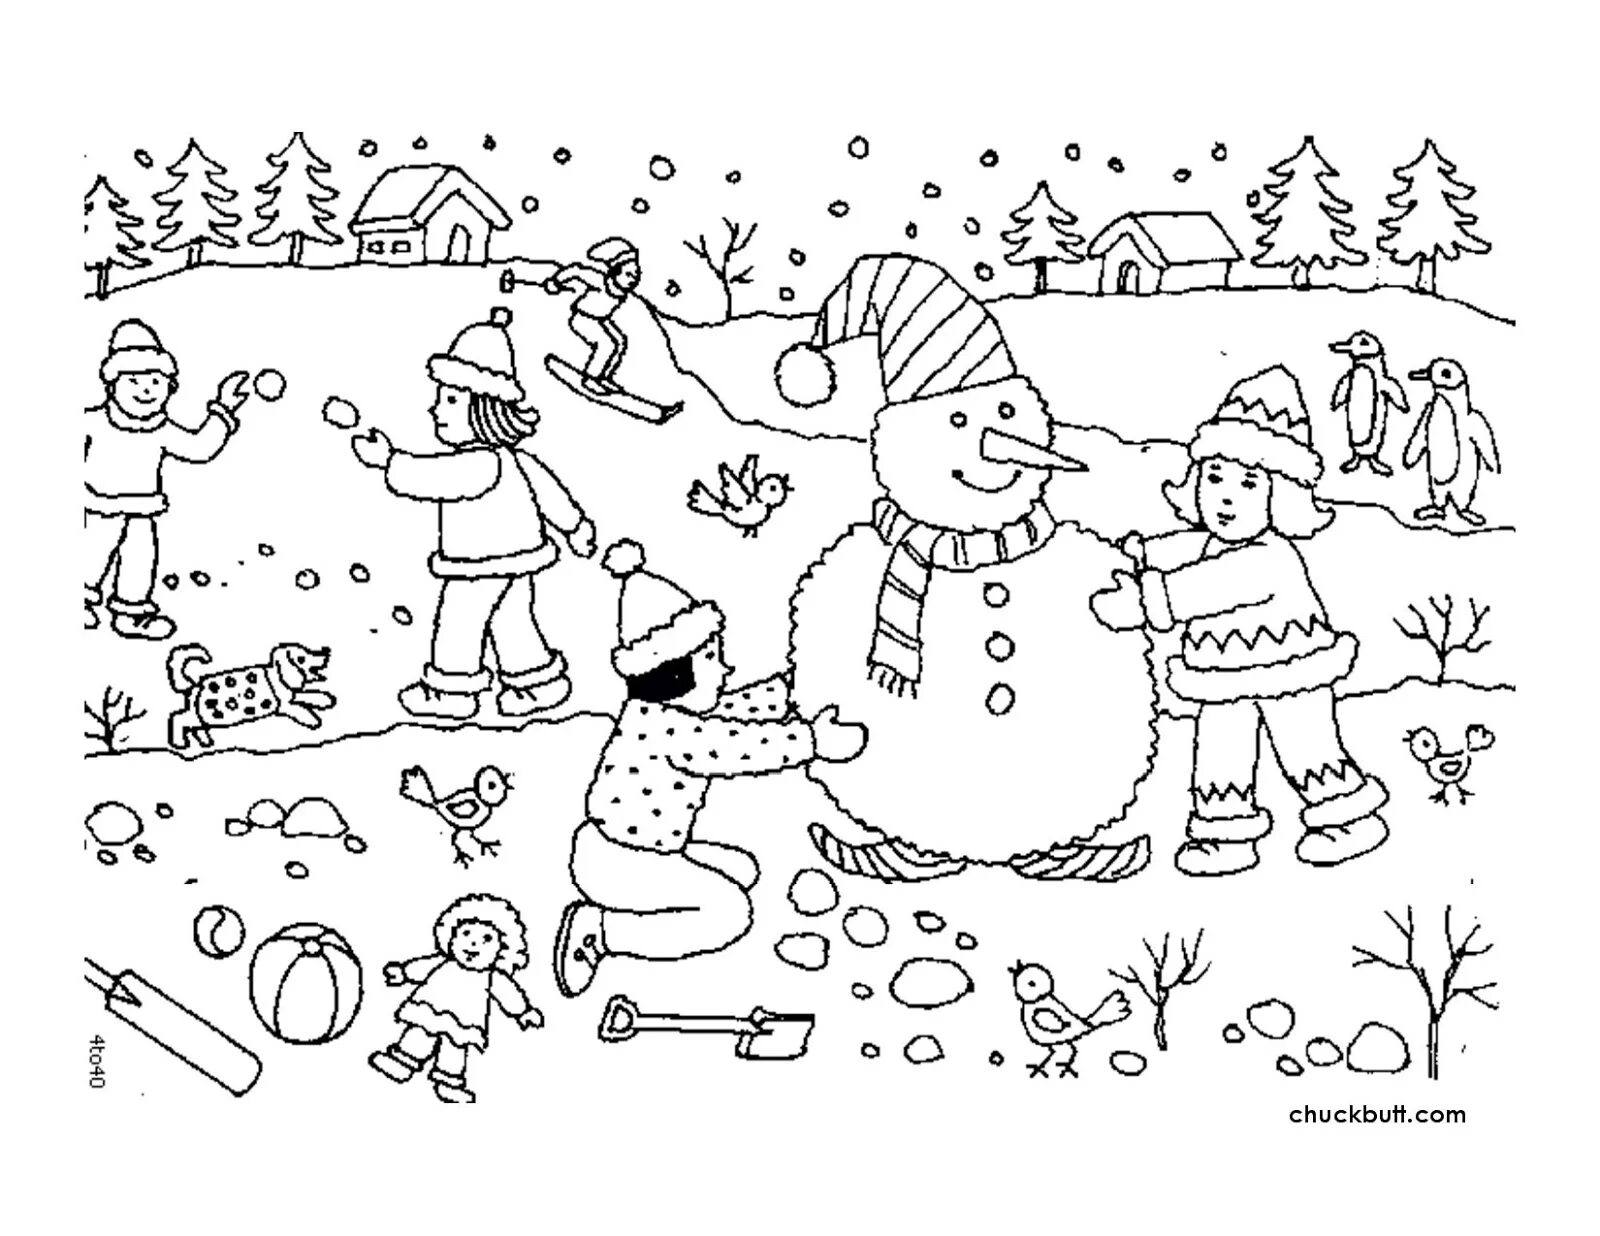 Superb winter fun coloring page